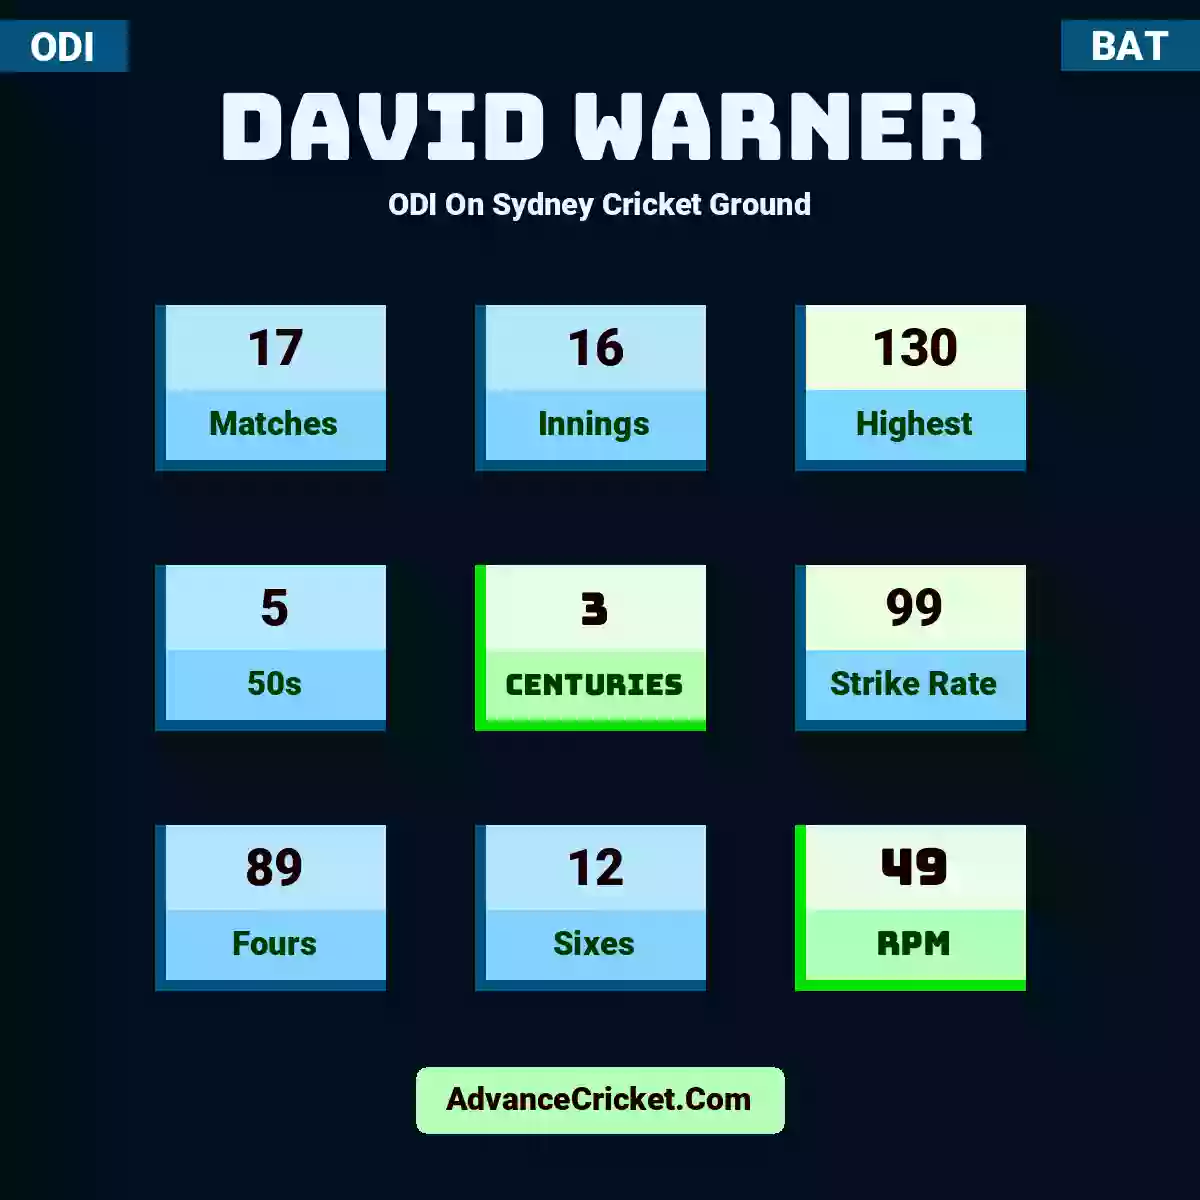 David Warner ODI  On Sydney Cricket Ground, David Warner played 17 matches, scored 130 runs as highest, 5 half-centuries, and 3 centuries, with a strike rate of 99. D.Warner hit 89 fours and 12 sixes, with an RPM of 49.